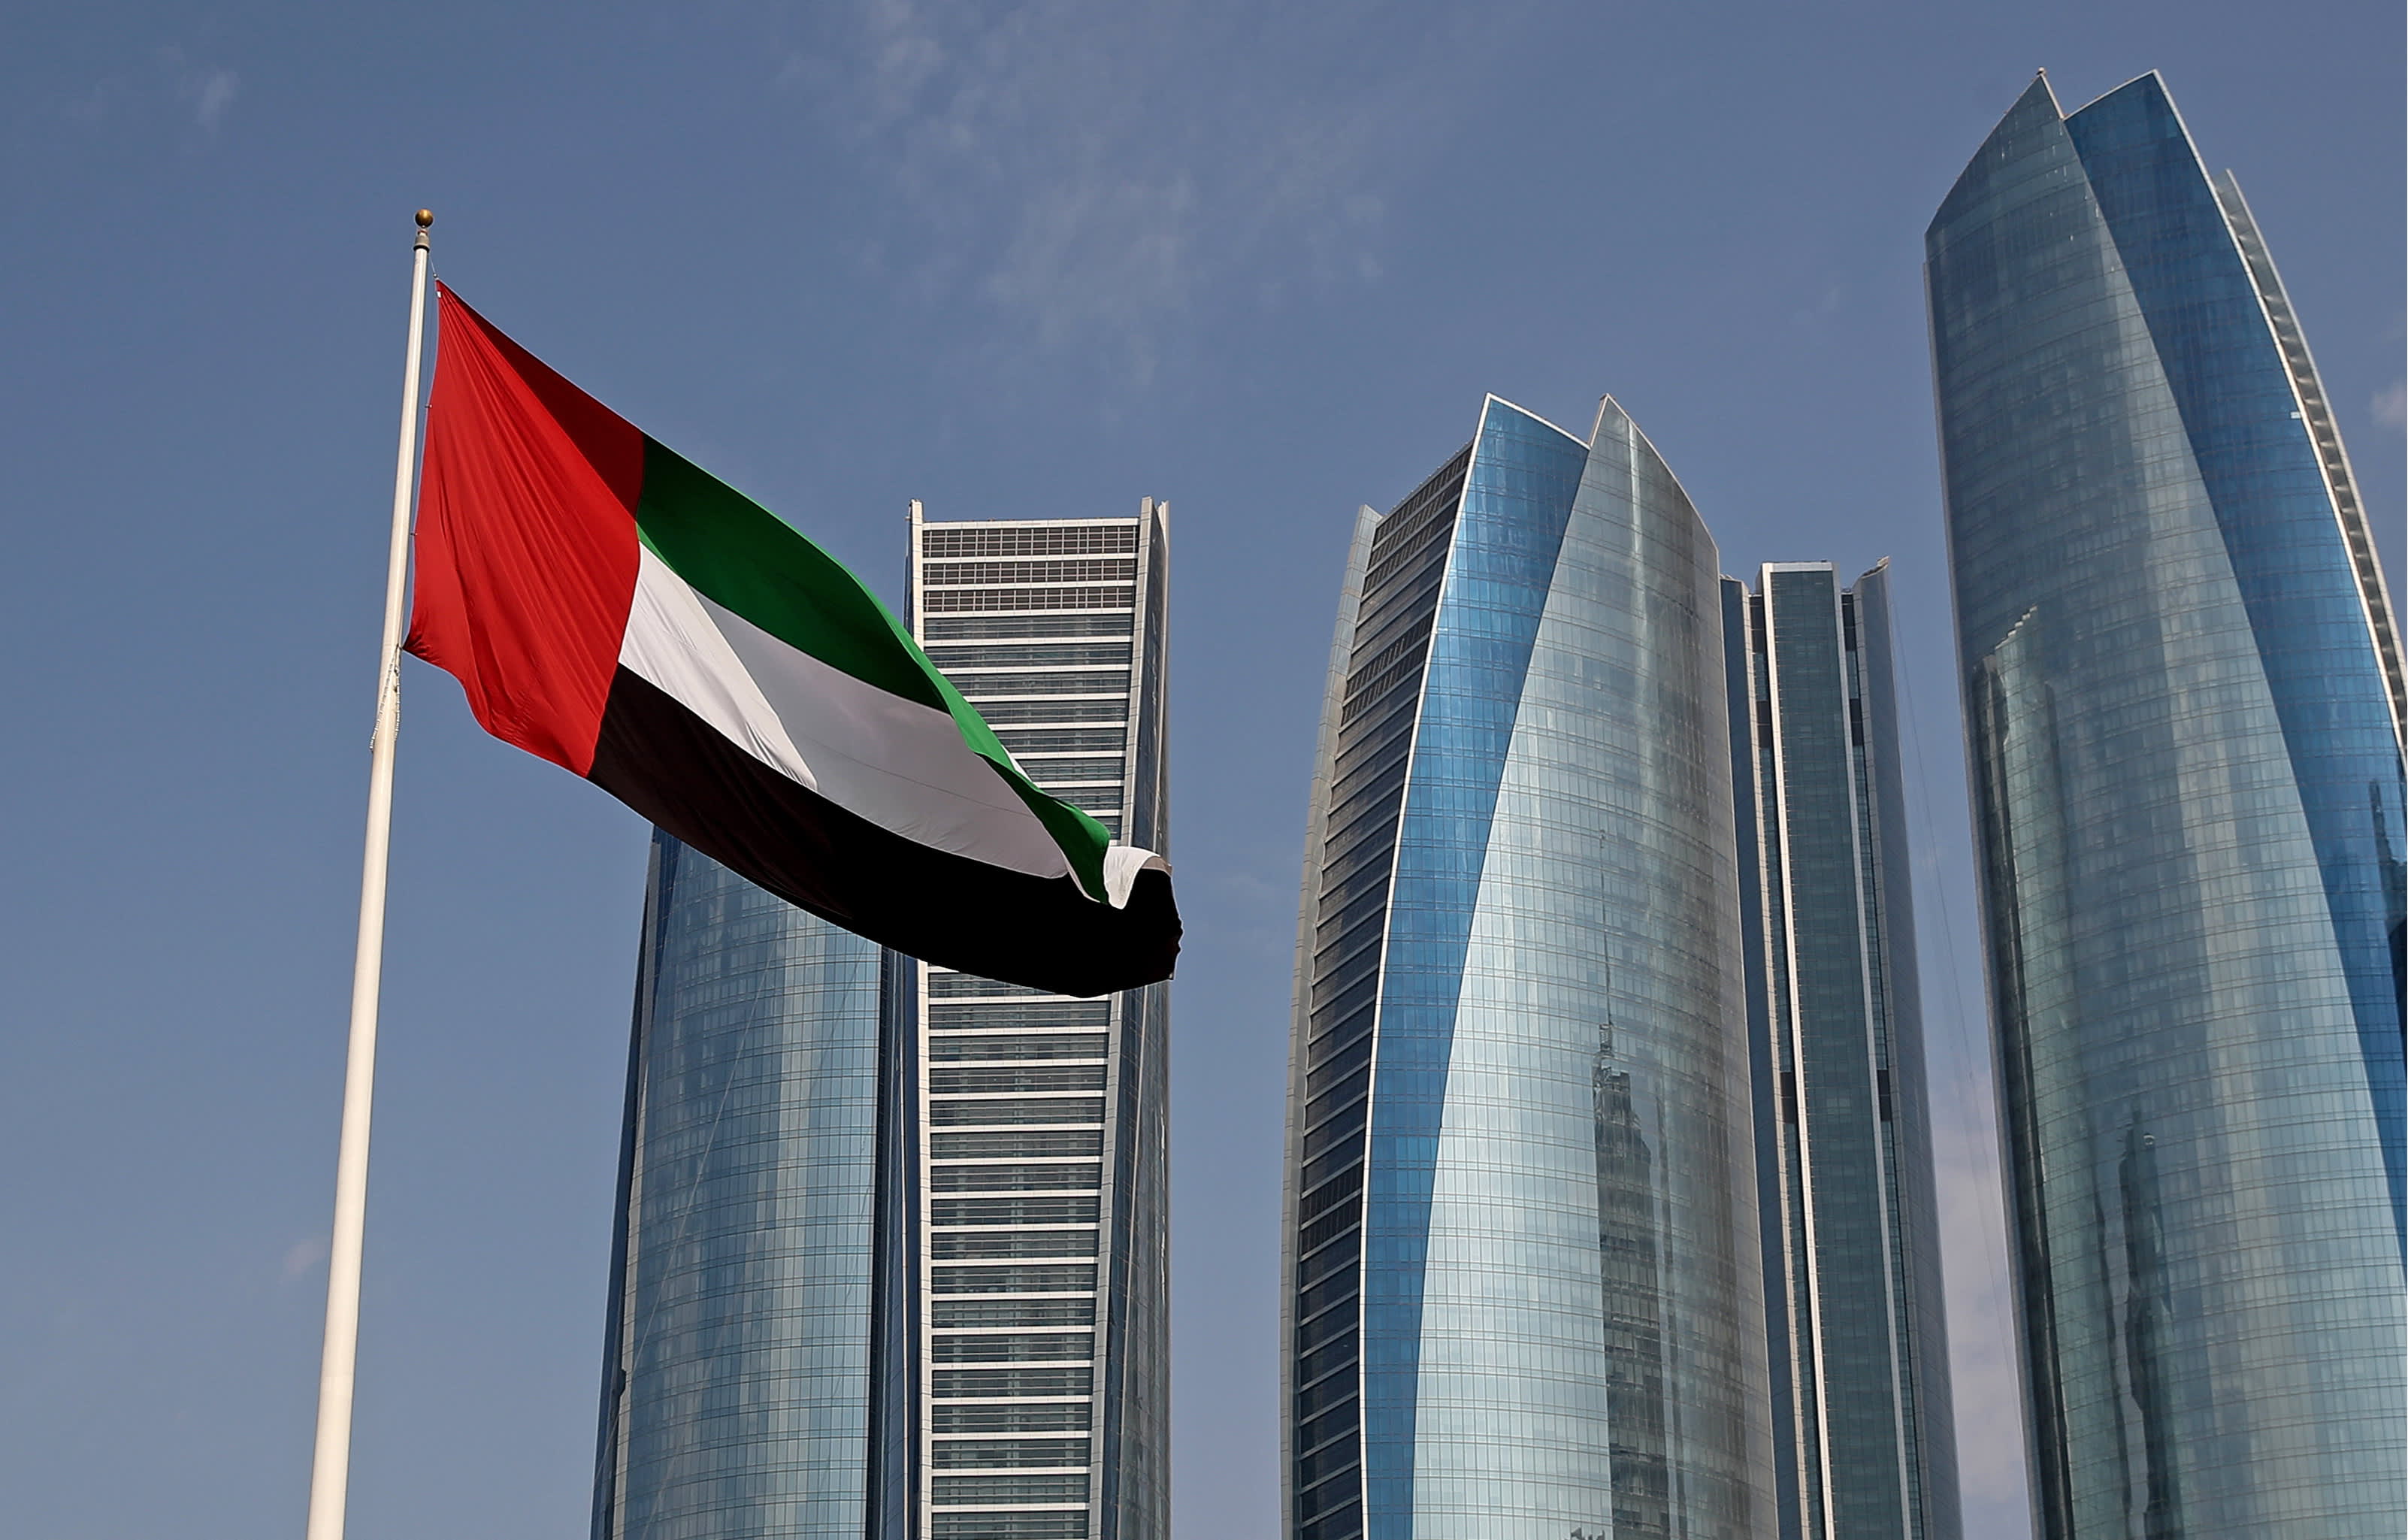 UAE reinstates visa-free entry for Ukrainians in quick reversal, offers year-long stay for arrivals prior to March 3